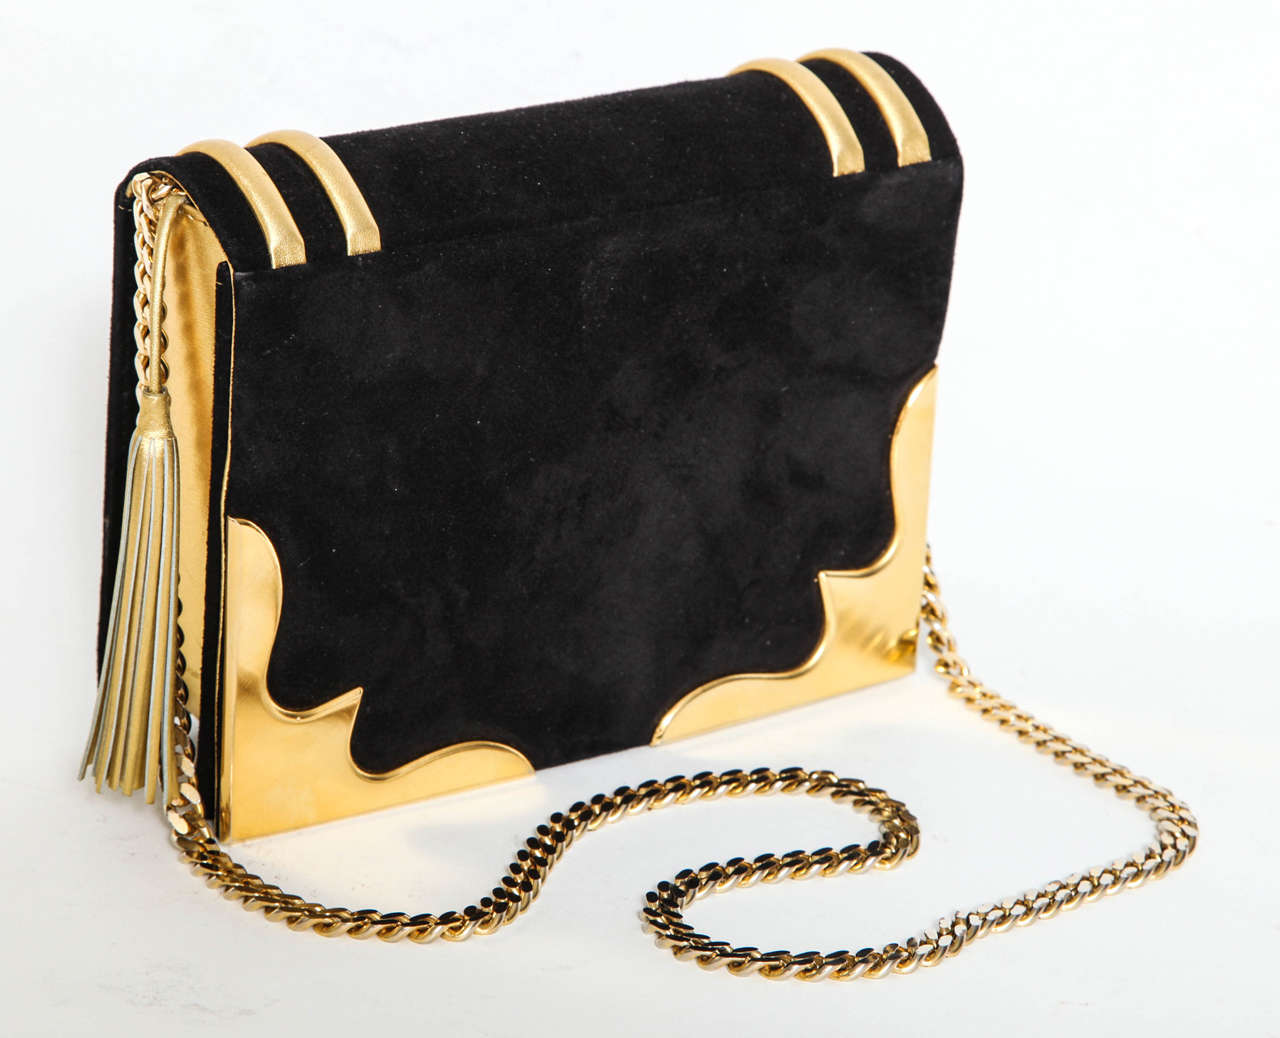 This purse is one of  Paloma Picassos's outstanding designs .  It is functional and stylish made of black suede and gold leather trim adorned with a gold leather tassel and gold chain and decorative corners.